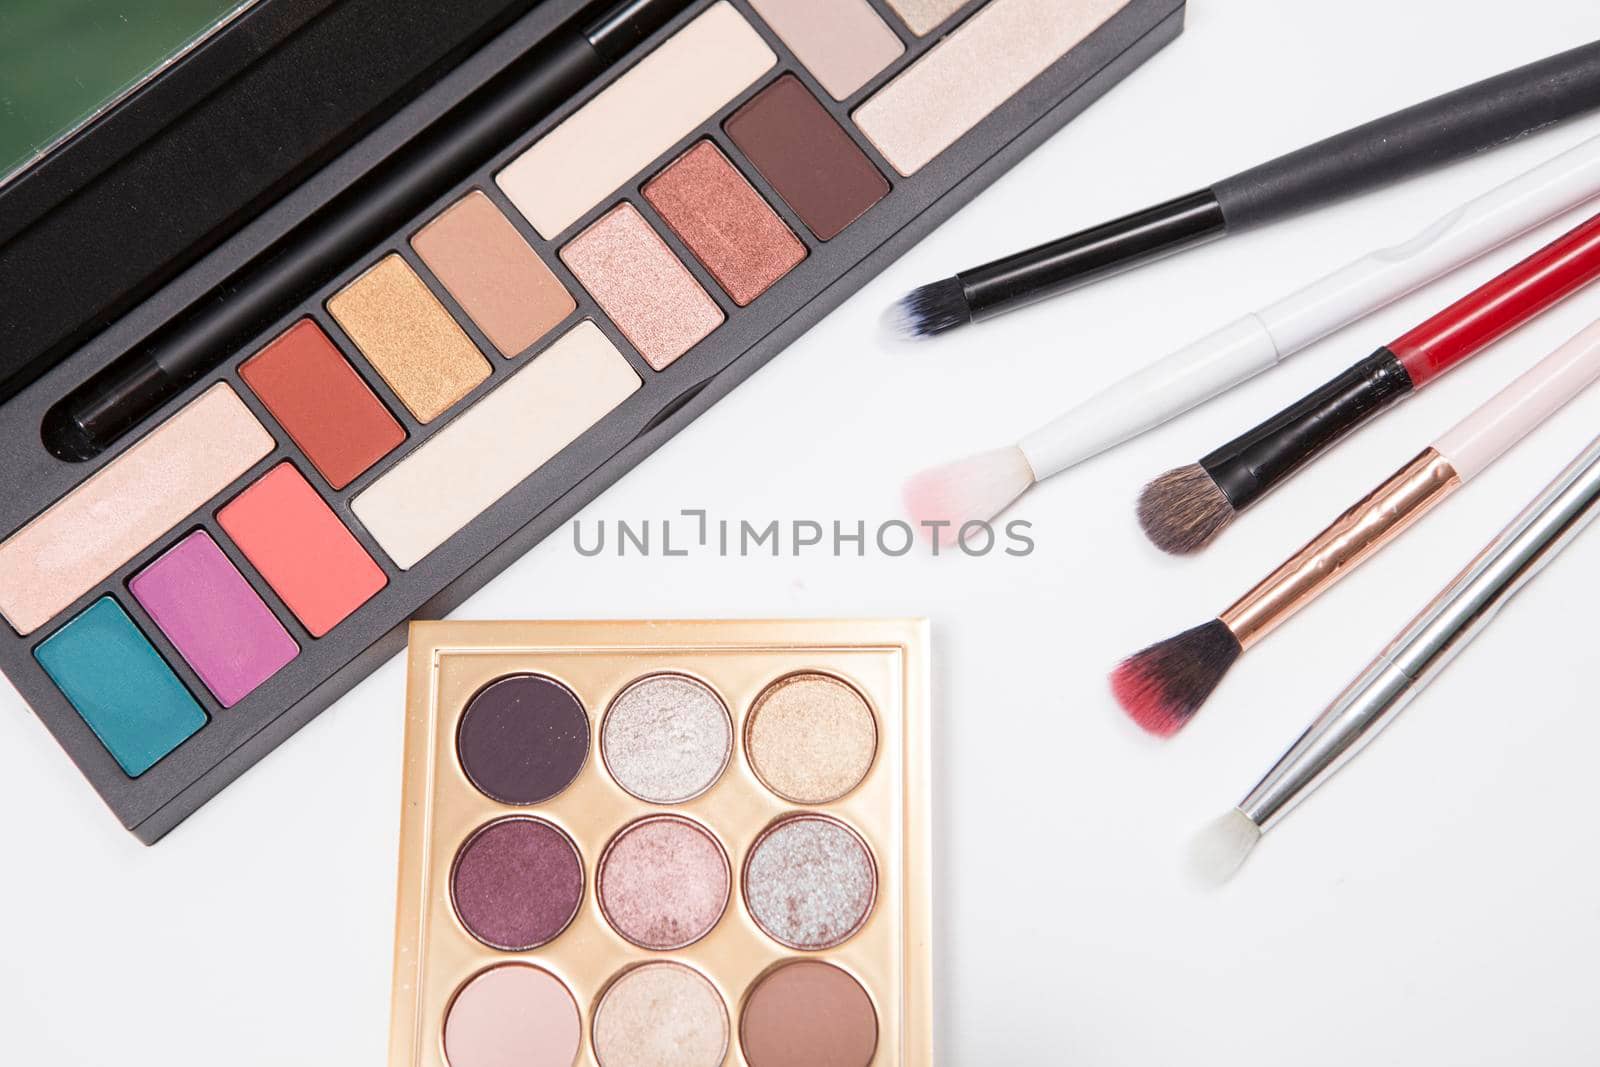 Eyeshadow makeup palette and makeup brushes by MAD_Production